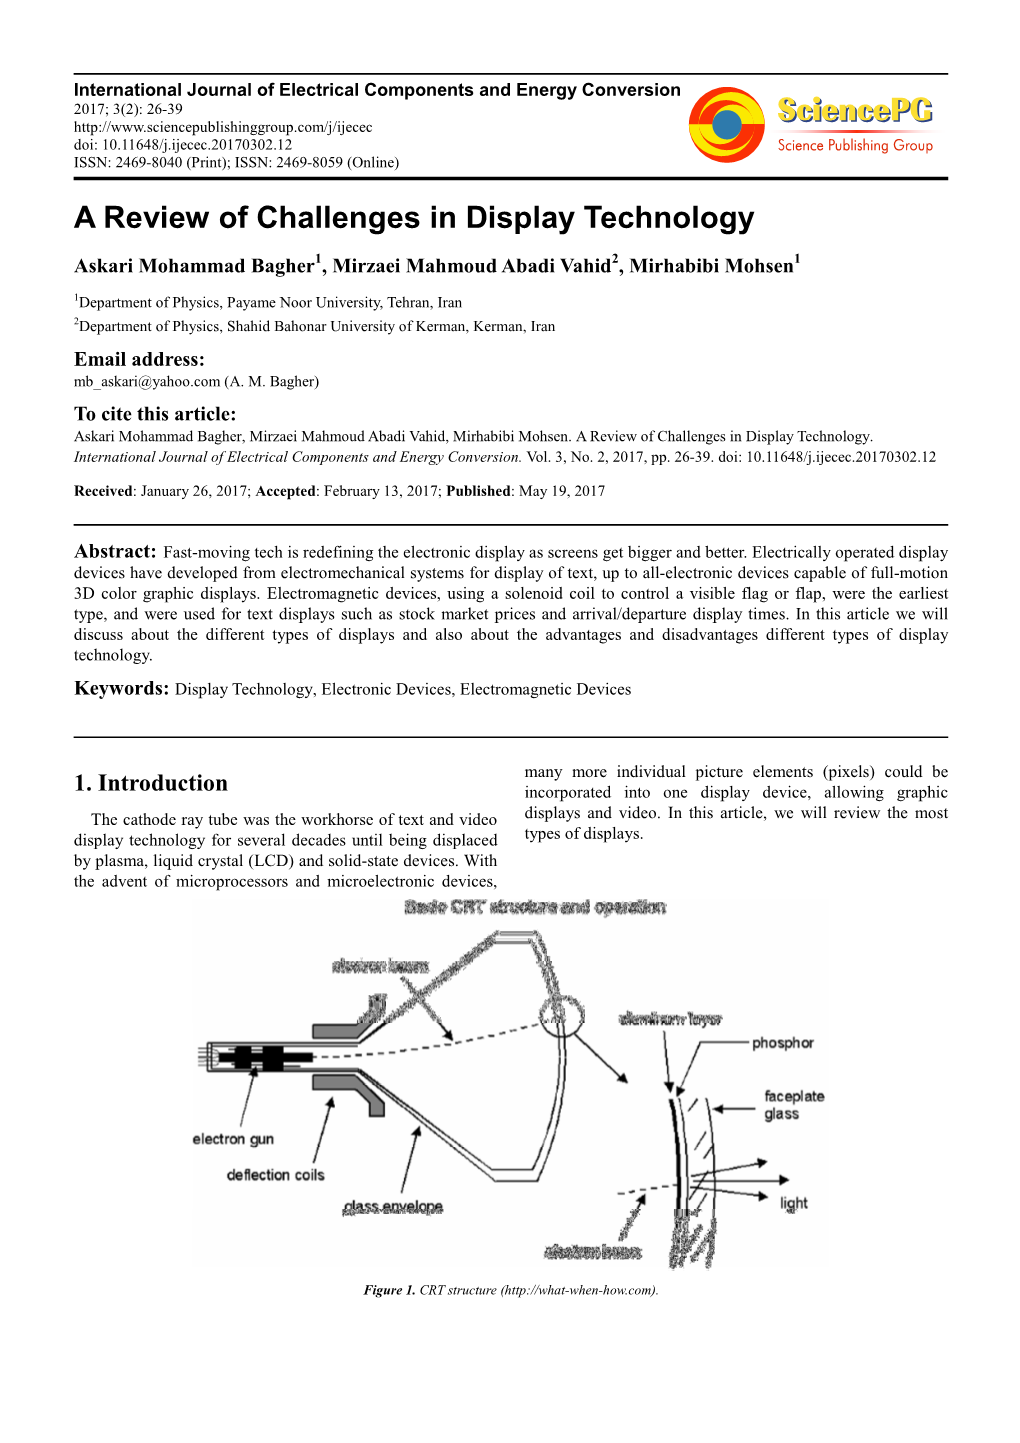 A Review of Challenges in Display Technology